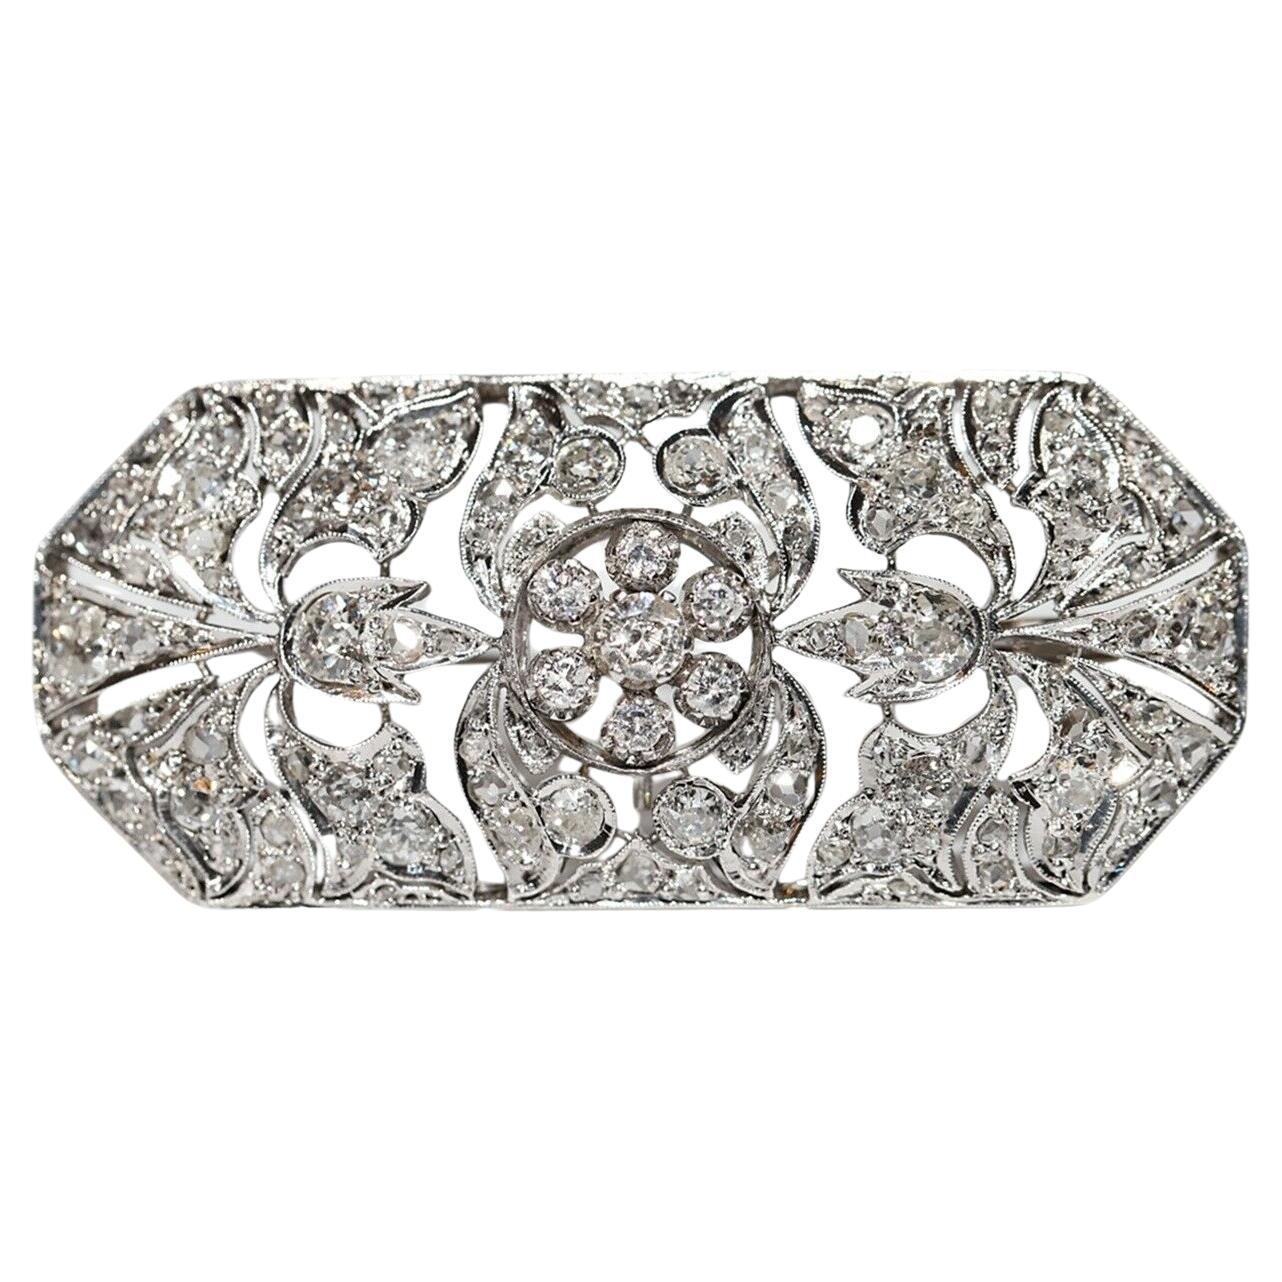 Antique Circa 1930s Art Deco 14k Gold Natural Diamond Decorated Brooch For Sale